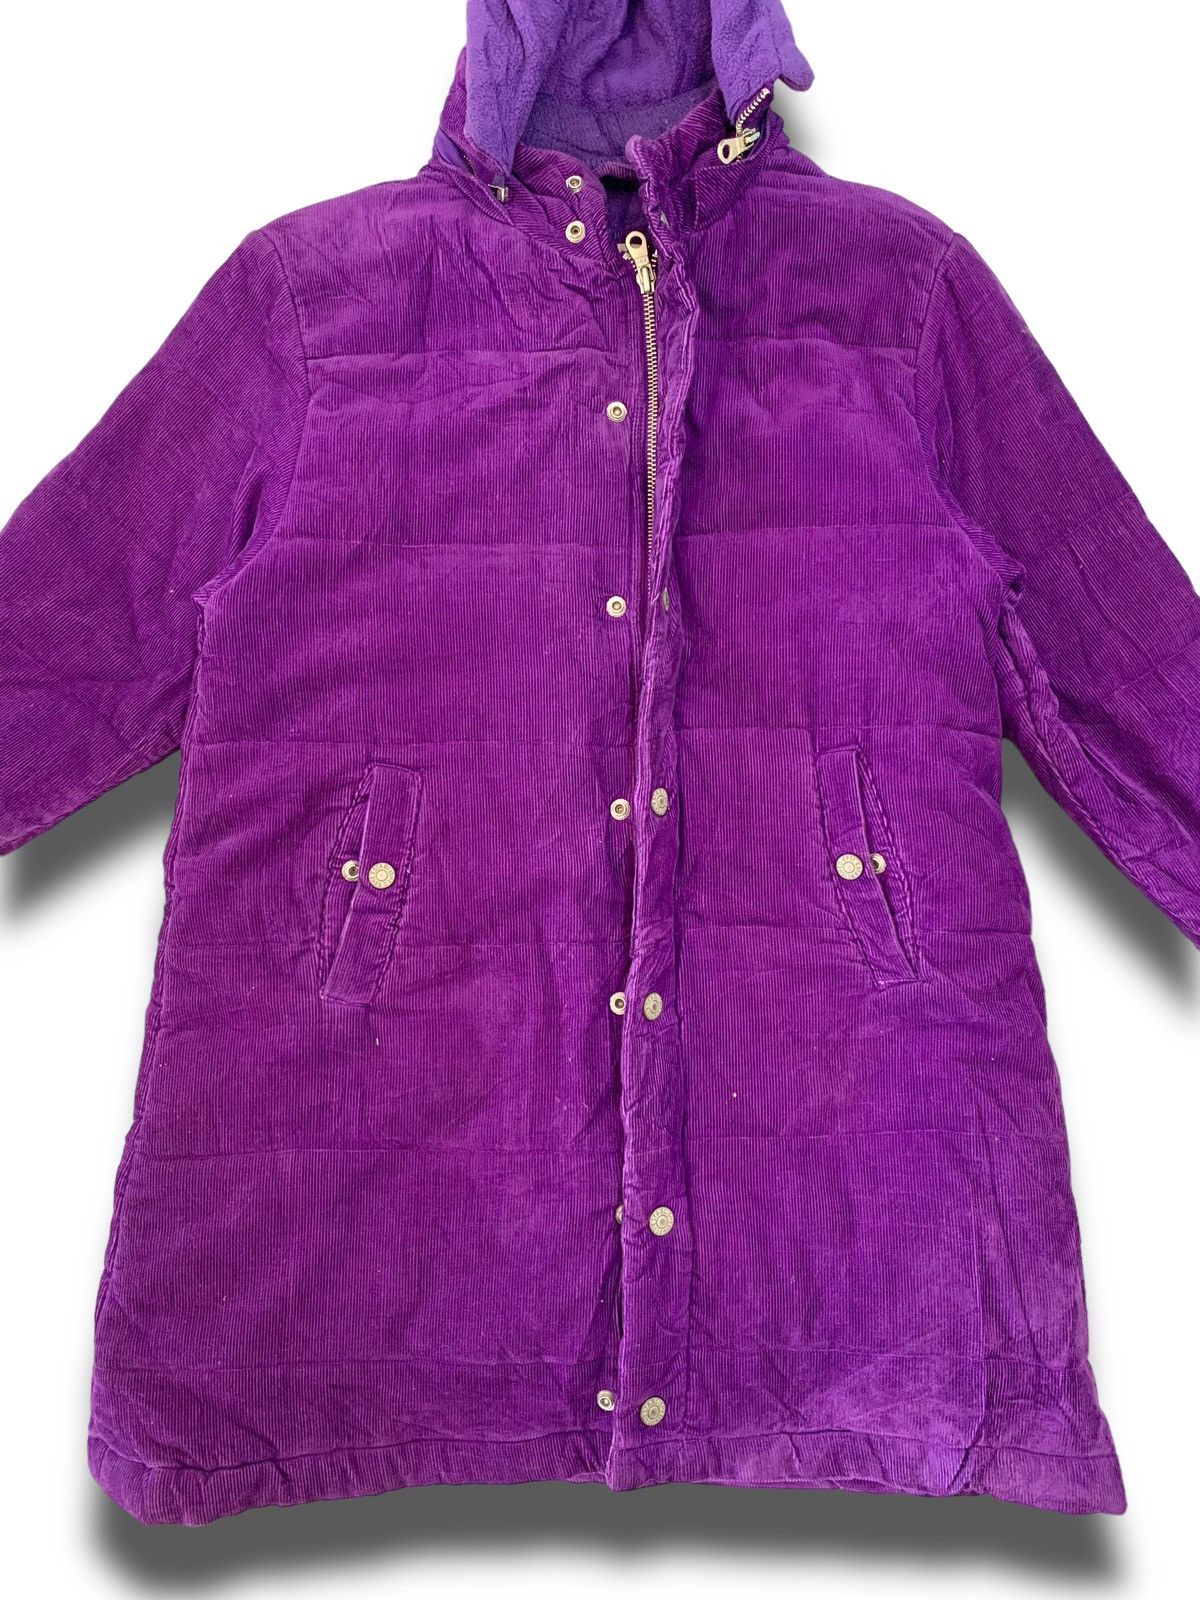 Archival Clothing Archival The Children’s Place Japanese Jacket Size L / US 10 / IT 46 - 1 Preview